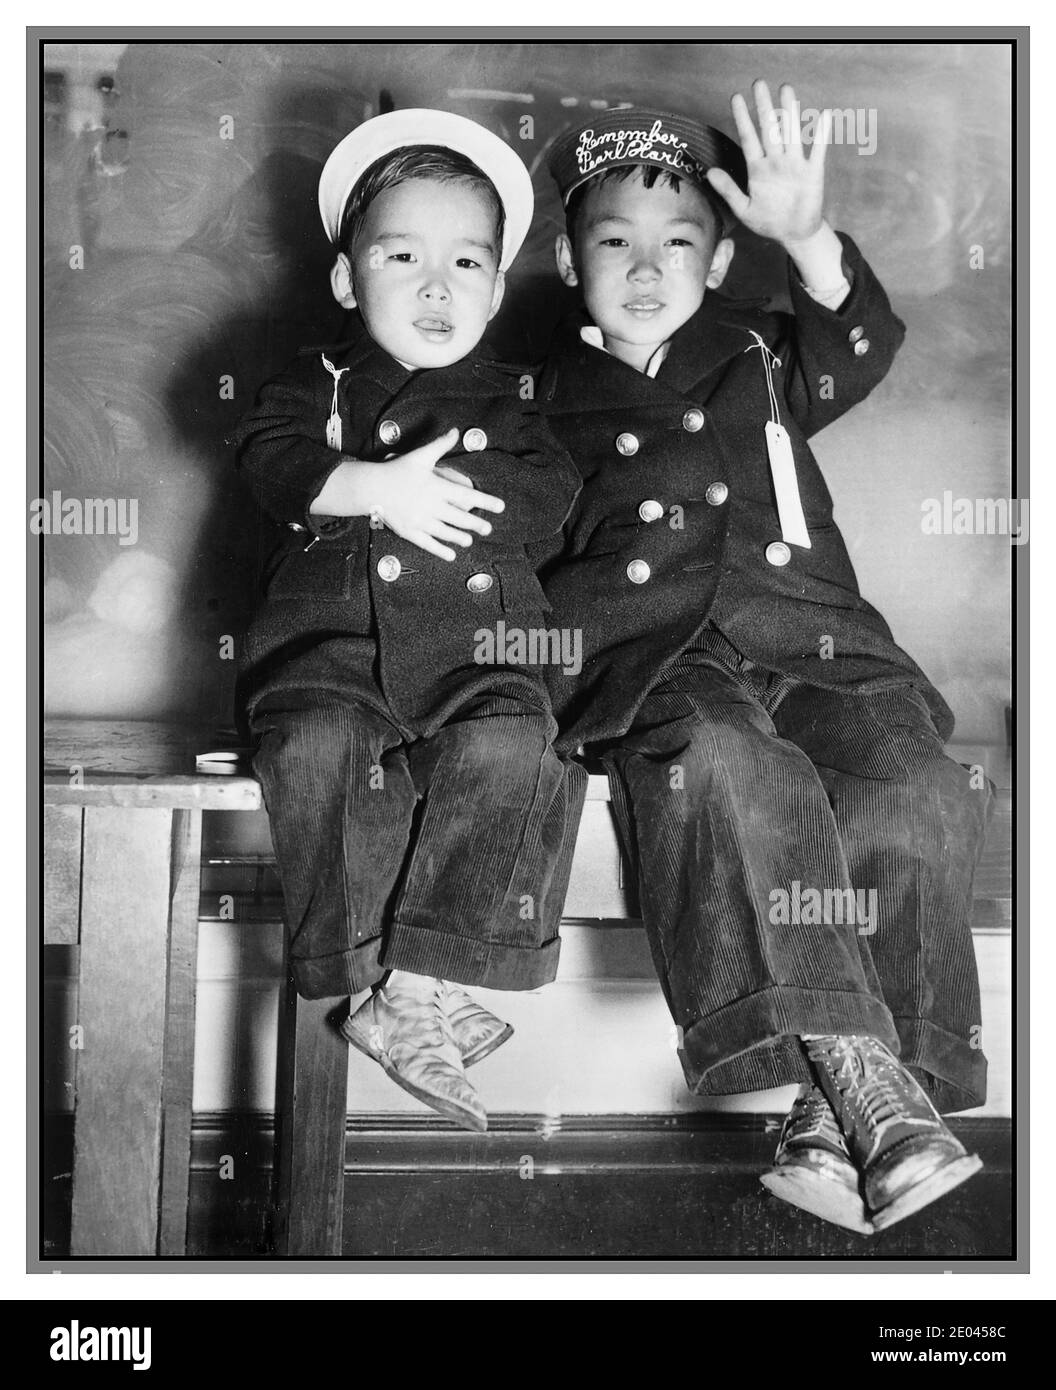 WW2 Propaganda Photo Japanese Evacution from USA San Francisco (Calif.) 1941 evacuation - Two Japanese boys, one with strip "Remember Pearl Harbor" on his hat, wave good-bye [while] awaiting the bus United States. Army. Signal Corps.[1942] -  Evacuations--California--San Francisco--1940-1950 -  Boys--California--San Francisco--1940-1950 -  World War, 1939-1945--Japanese Americans--California--San Francisco Arrivals & departures--California--San Francisco--1940-1950 Photographic prints--1940-1950. Stock Photo